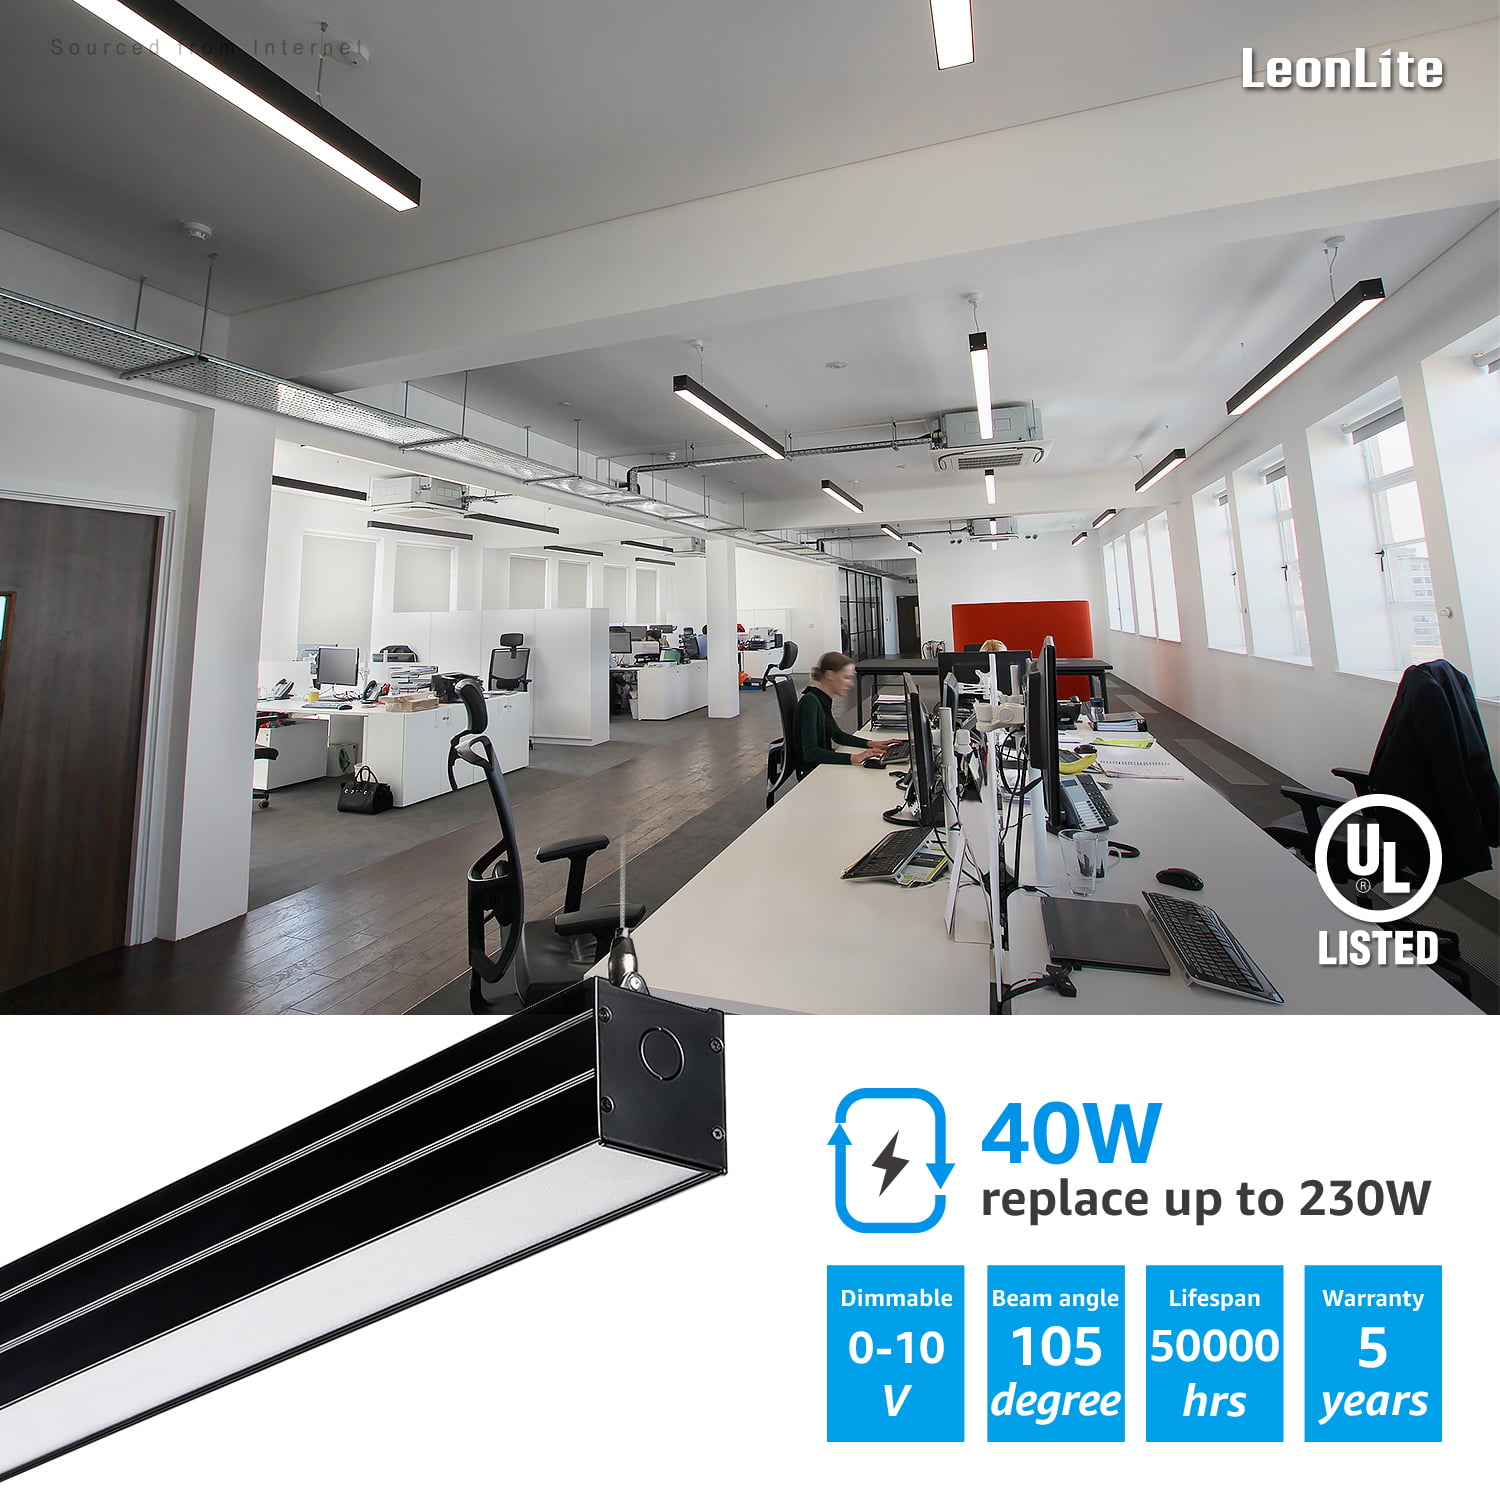 40W LEONLITE 4ft Dimmable LED Linear Light 100W-230W Eq. 4000K Cool White Pack of 2 5 Years Warranty UL & DLC Garage 4600lm Linkable Suspension Lighting Fixture Black for Office Market